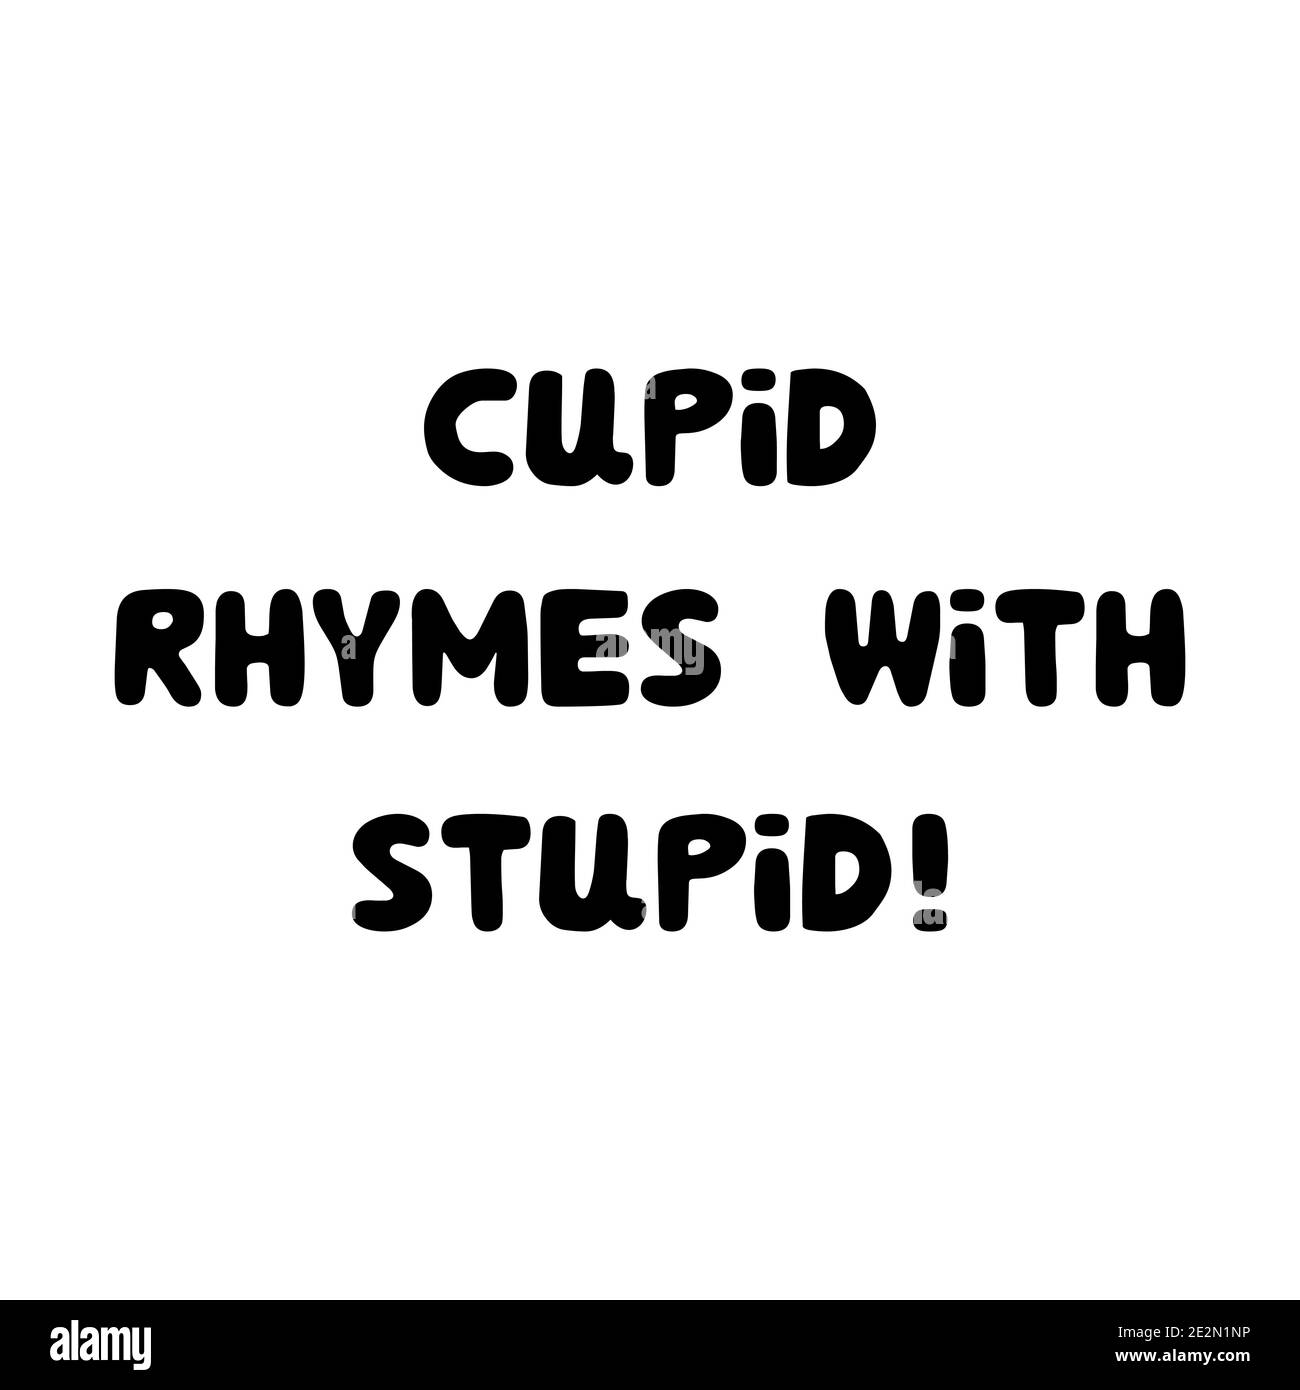 Cupid rhymes with stupid. Handwritten roundish lettering isolated on a white background. Stock Vector